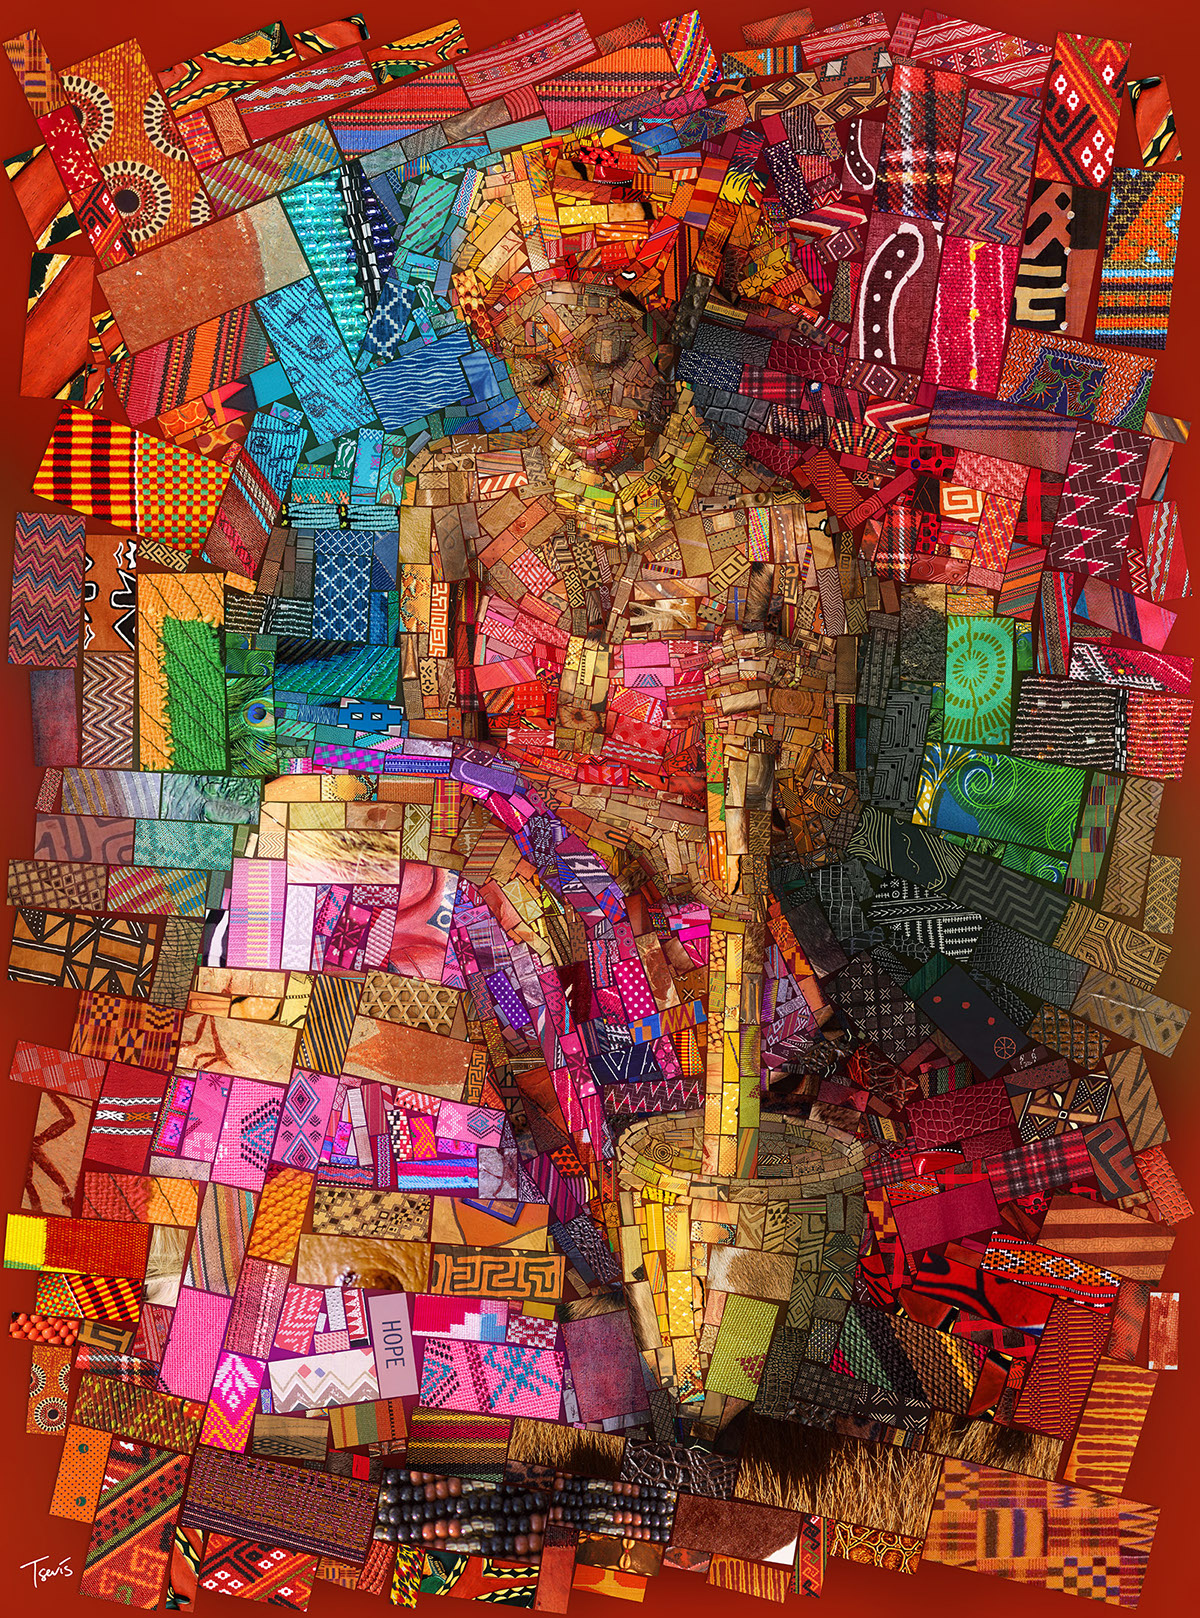 Incredible Mosaics inspired by the African bricks by Charis Tsevis